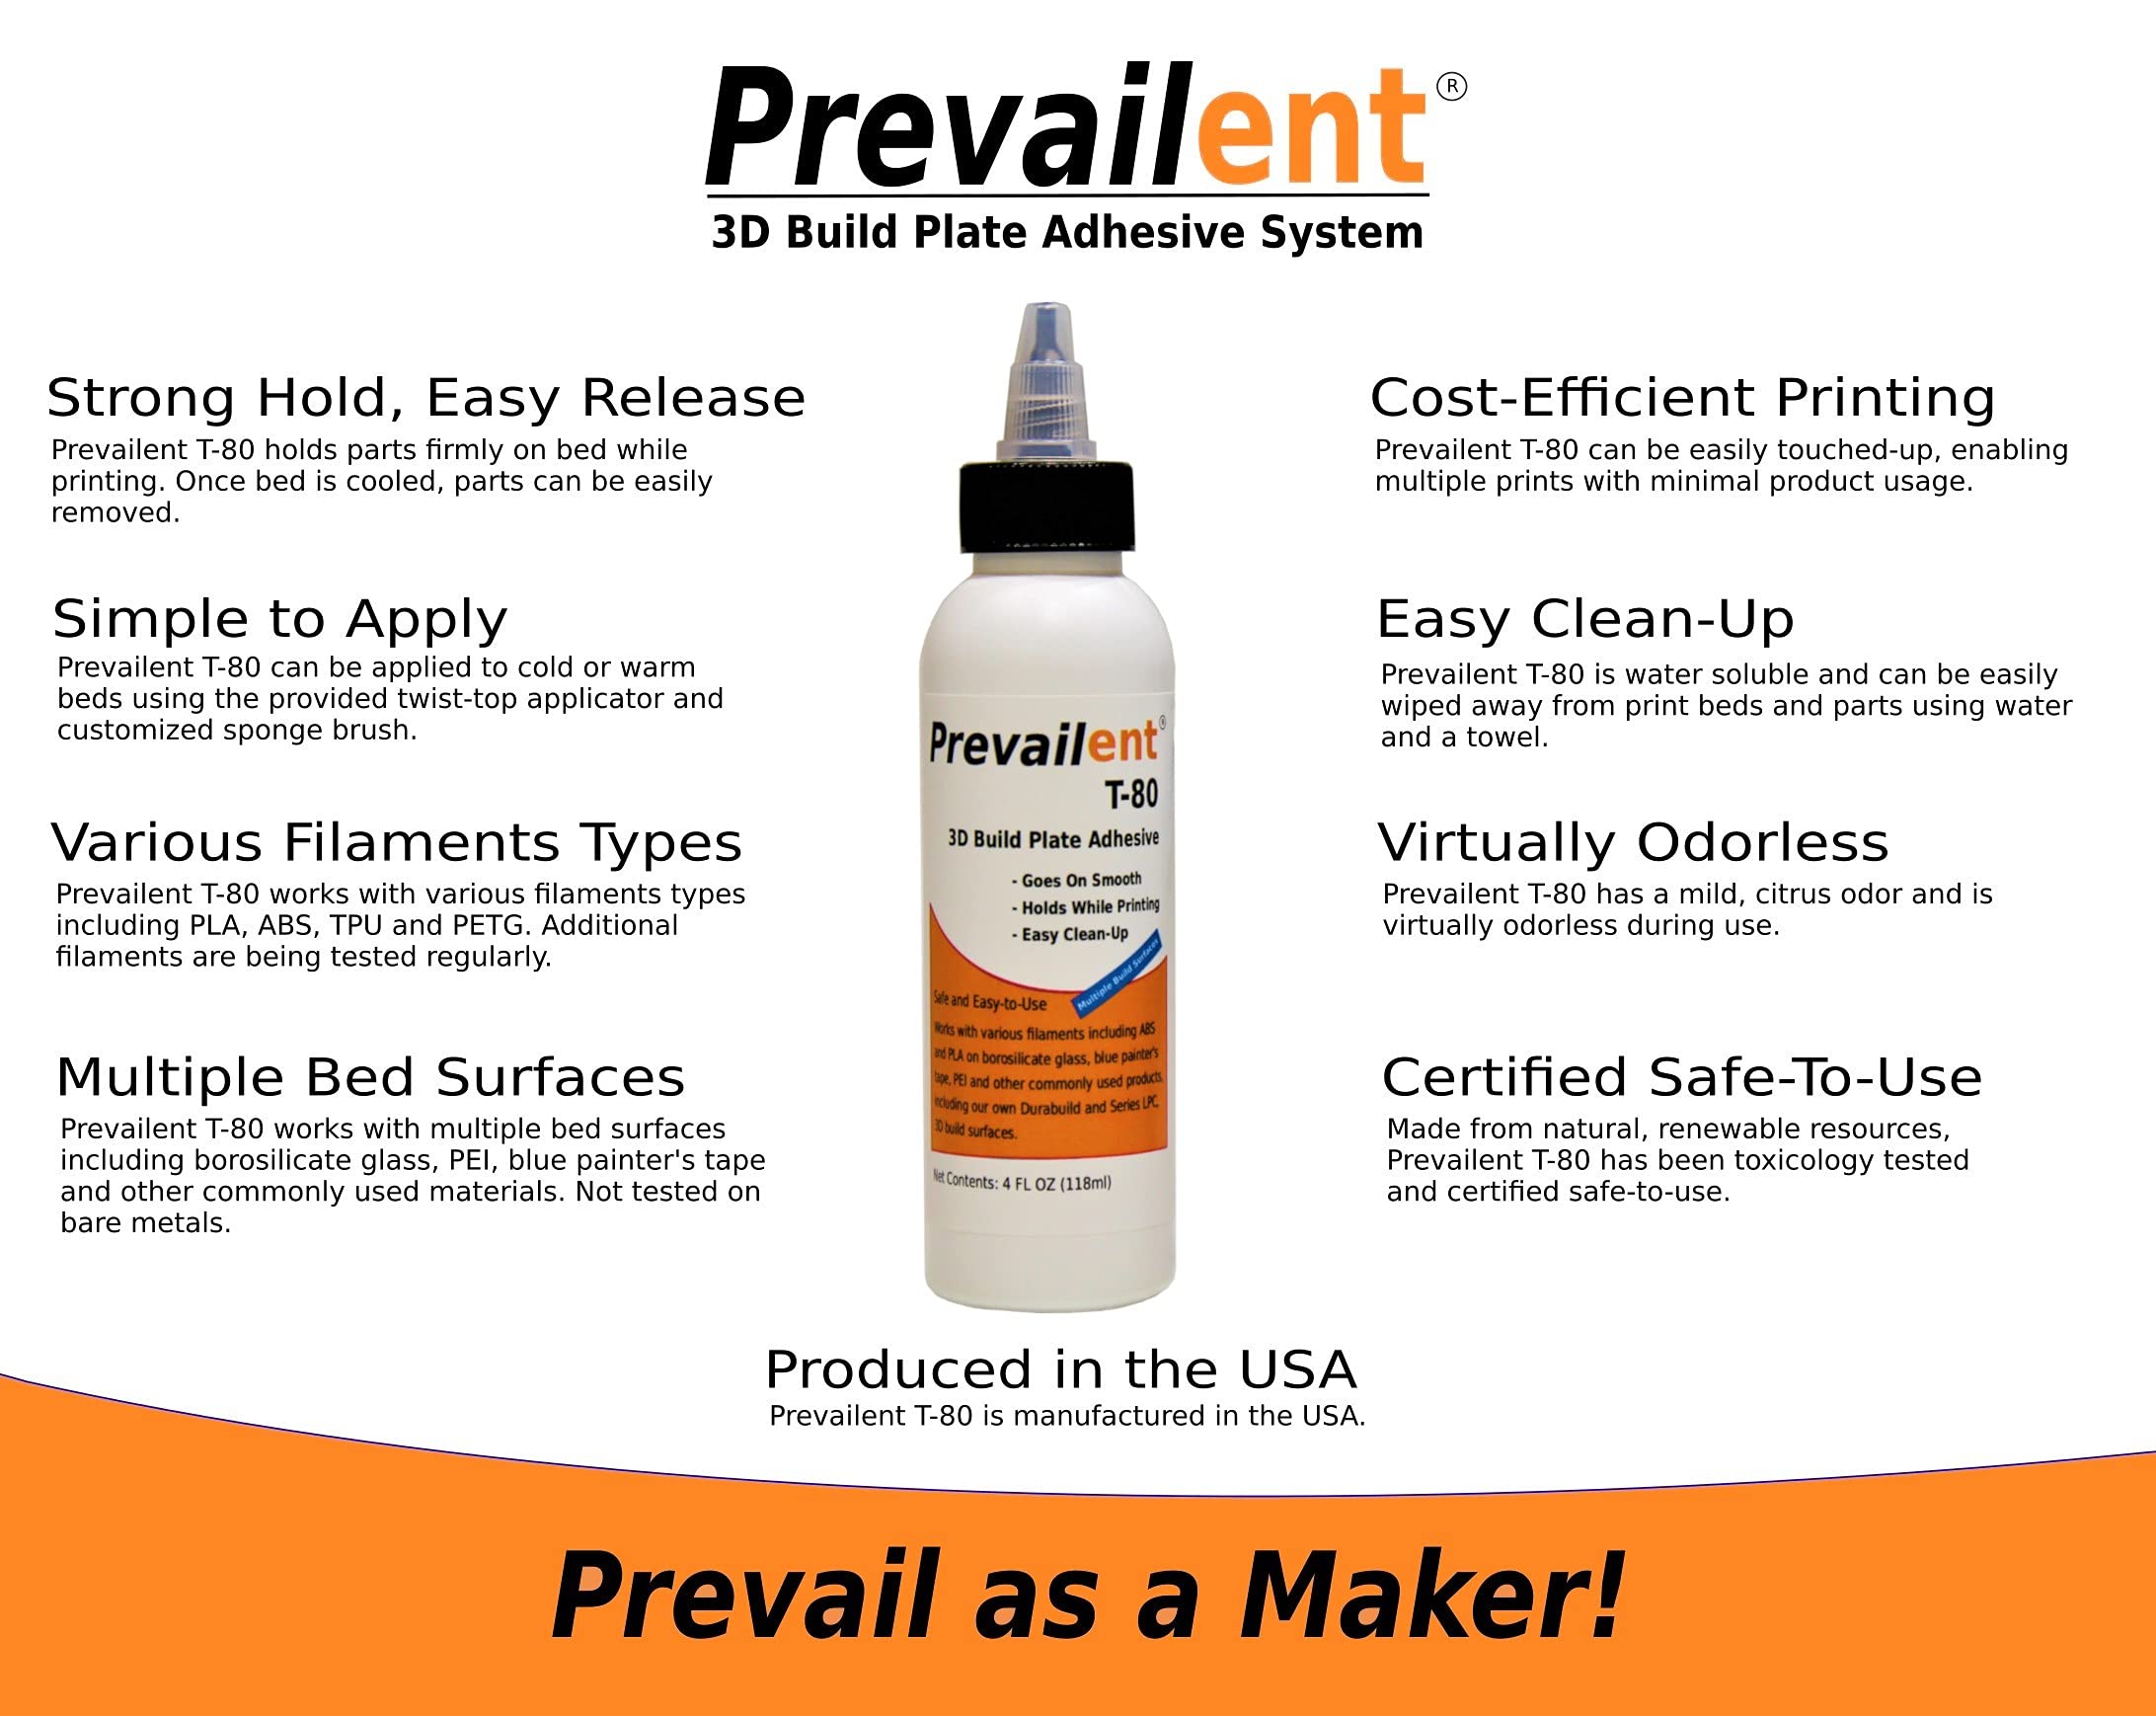 Prevailent T-80, 3D Printer Bed Adhesive Glue - Helps Prevent Warping, Strong Hold and Easy Release with Various Build Plates and Filament Types Including PLA, ABS, TPU, and PETG, 4 fl oz. (118ml)